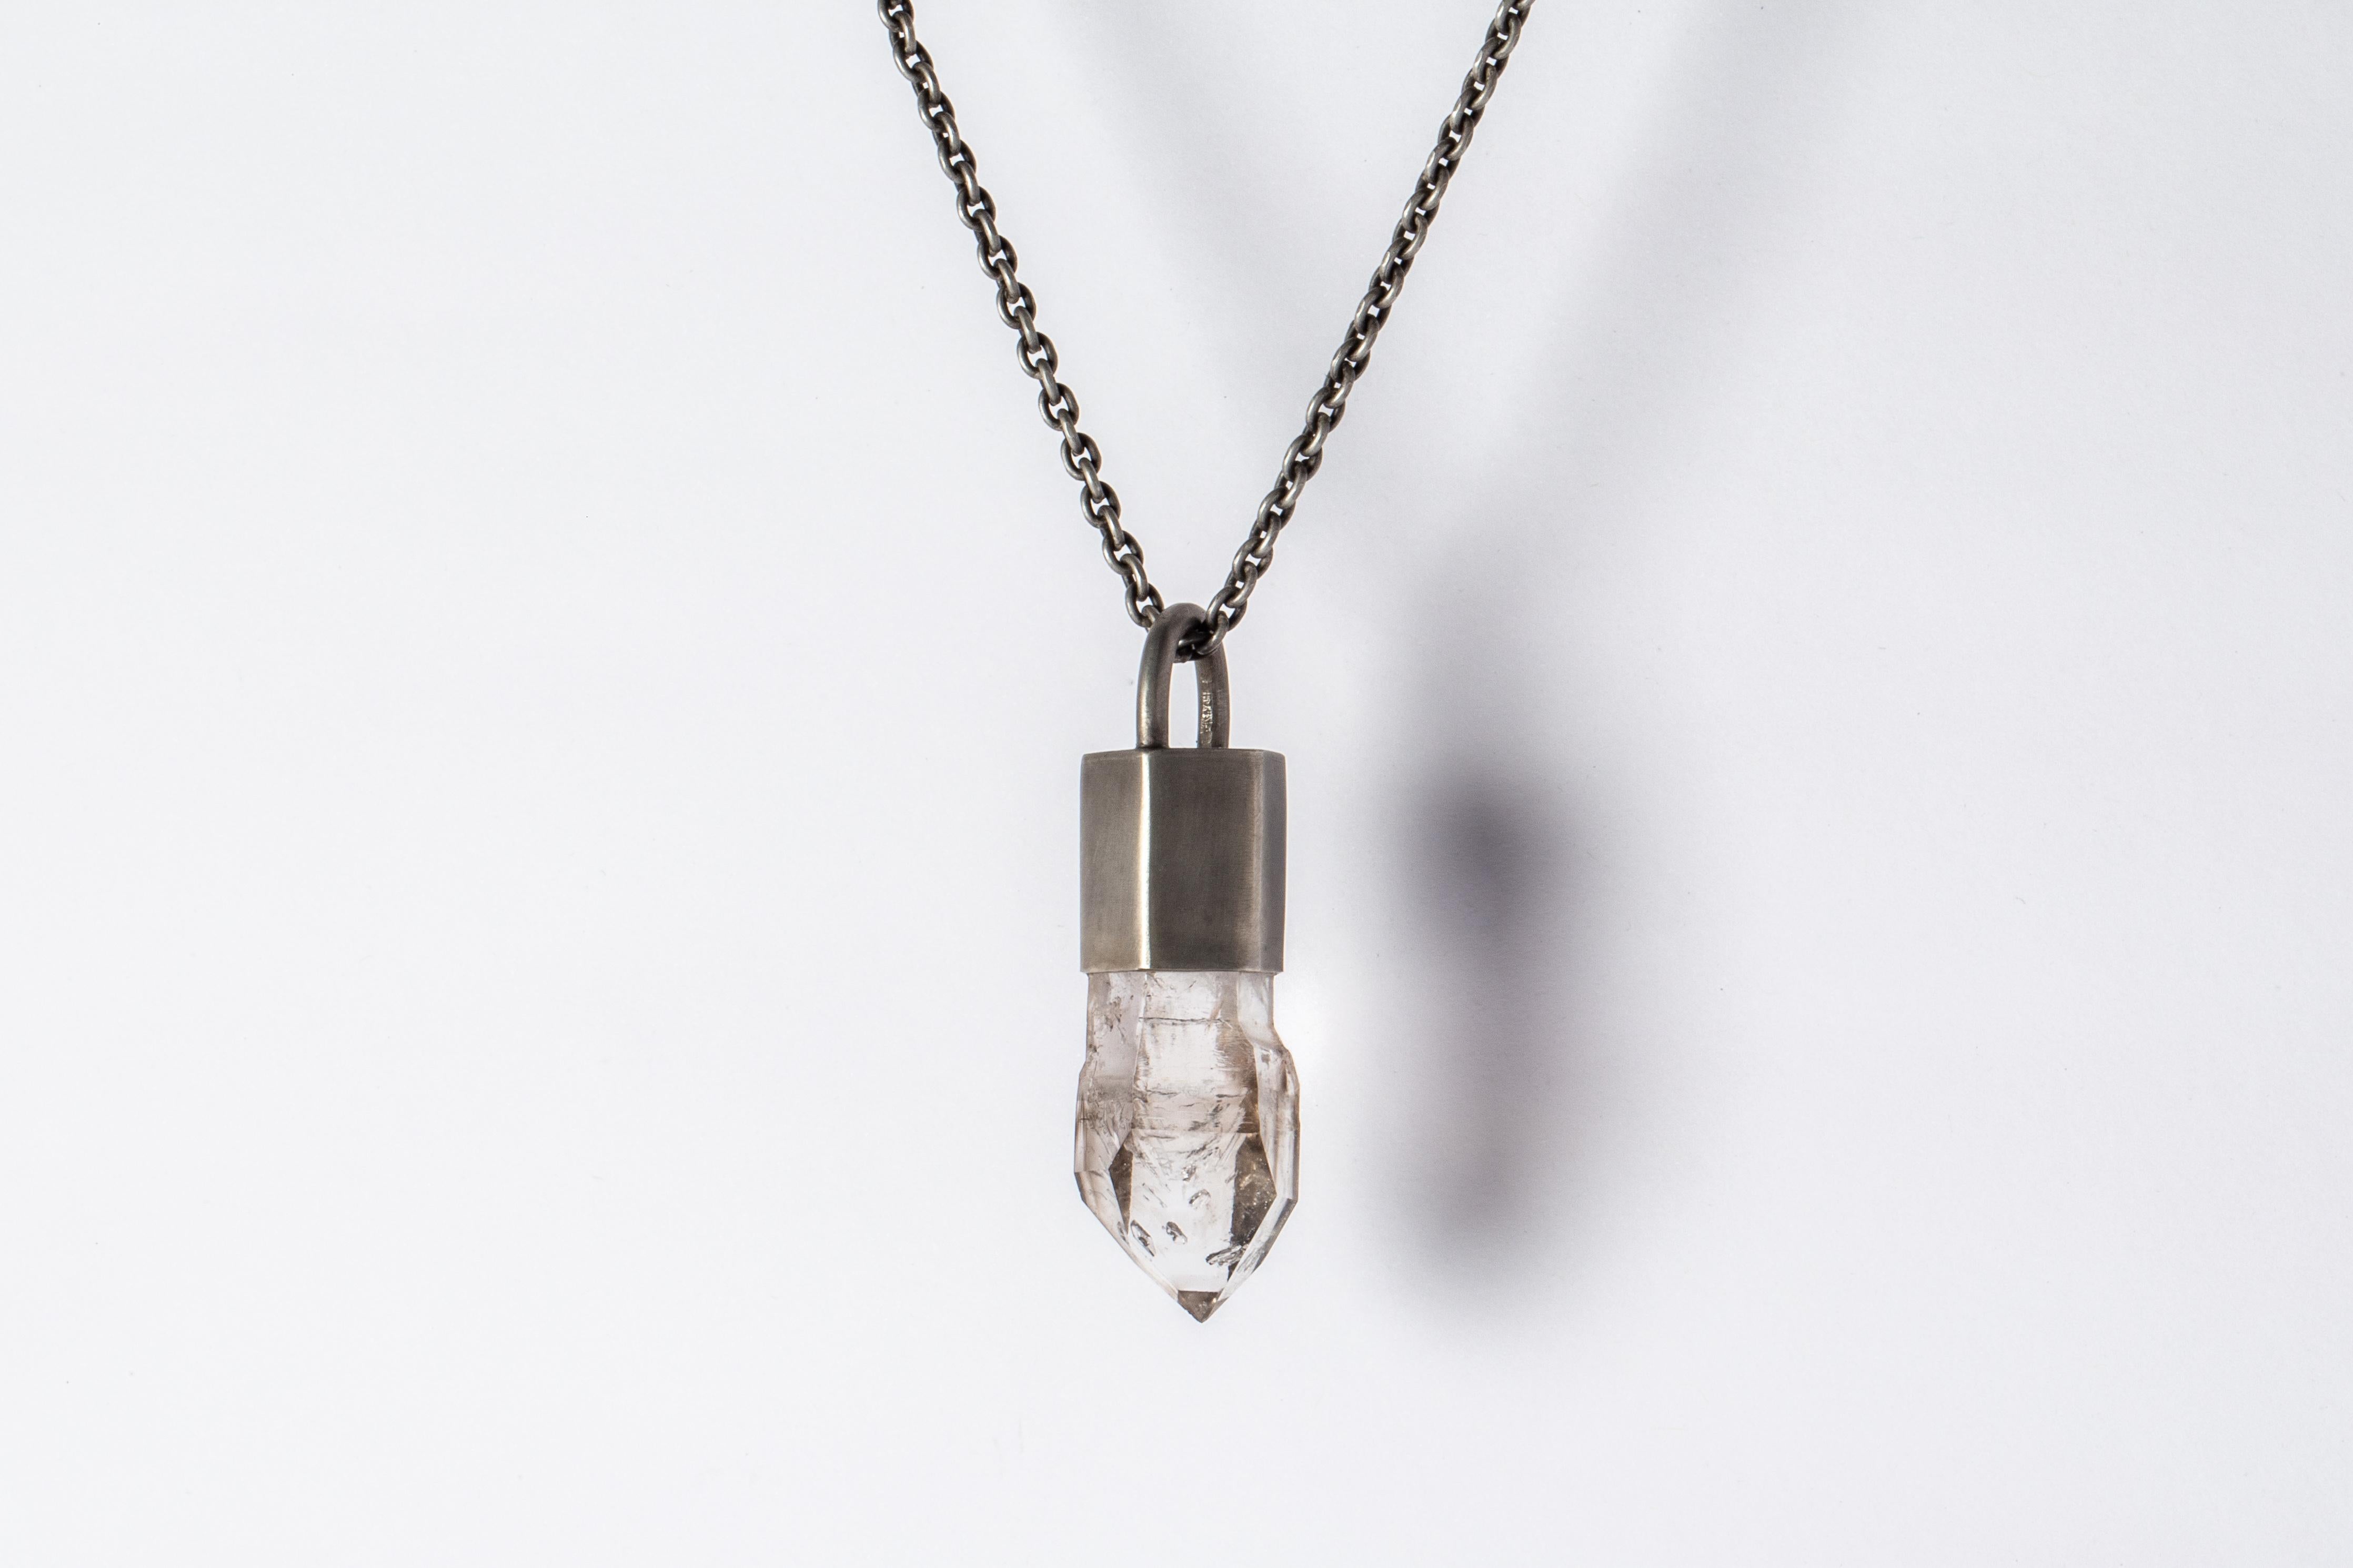 Talisman necklace in dirty sterling silver and a rough of enhydro quartz. Sterling silver, dipped in acid to create a subdued surface. The Talisman series is an exploration into the power of natural crystals. The crystals used in these pieces are